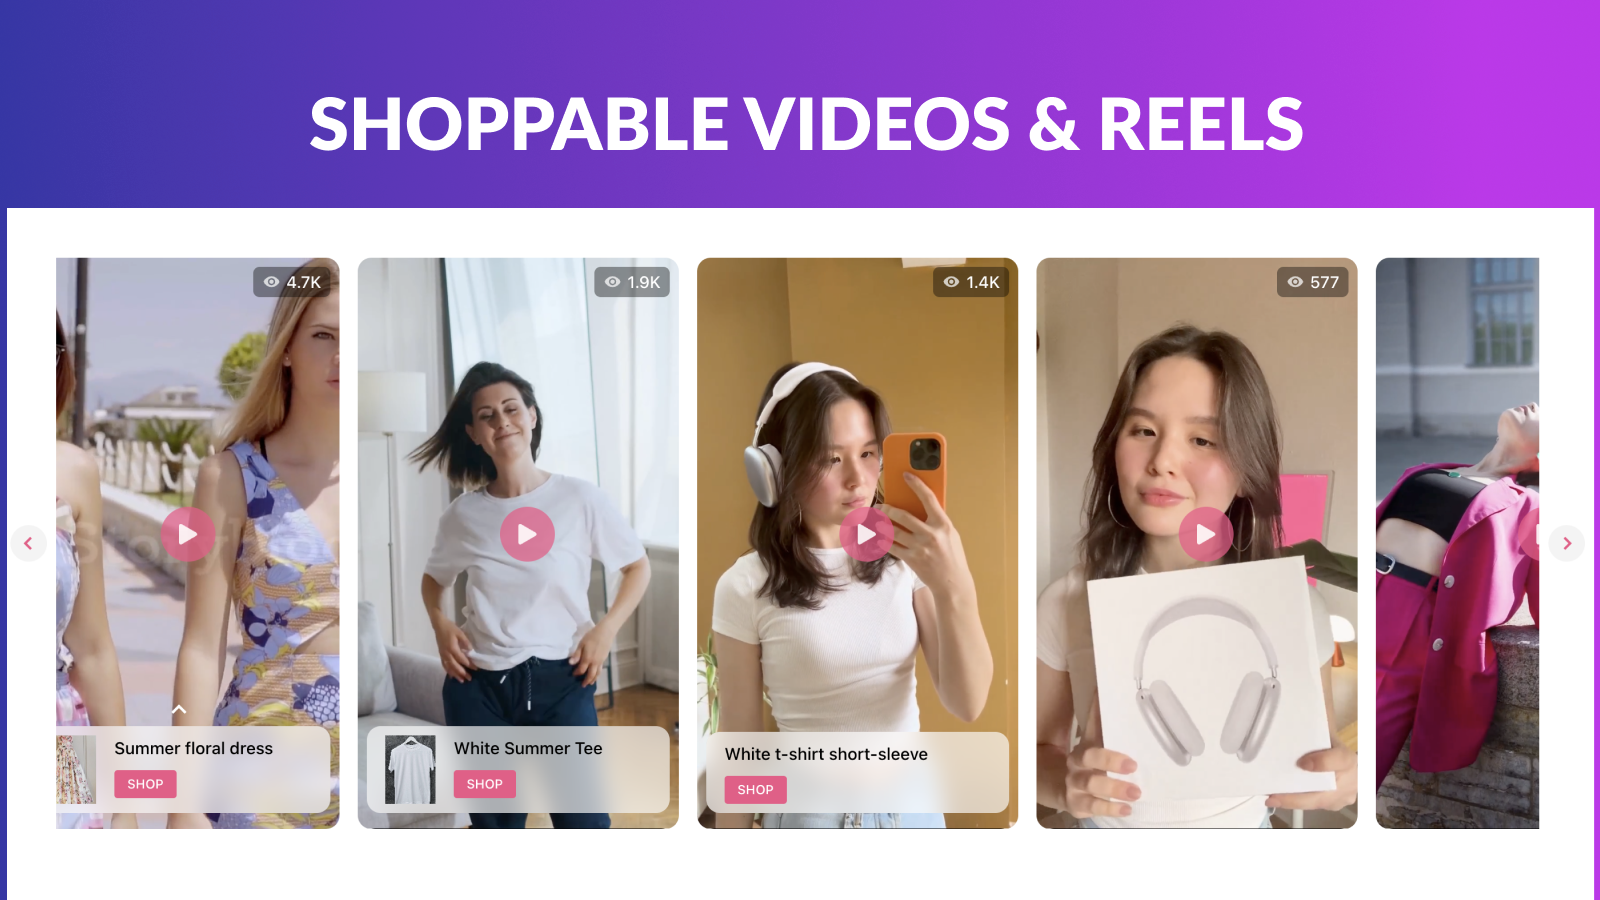 Showcase reels in a shoppable feed